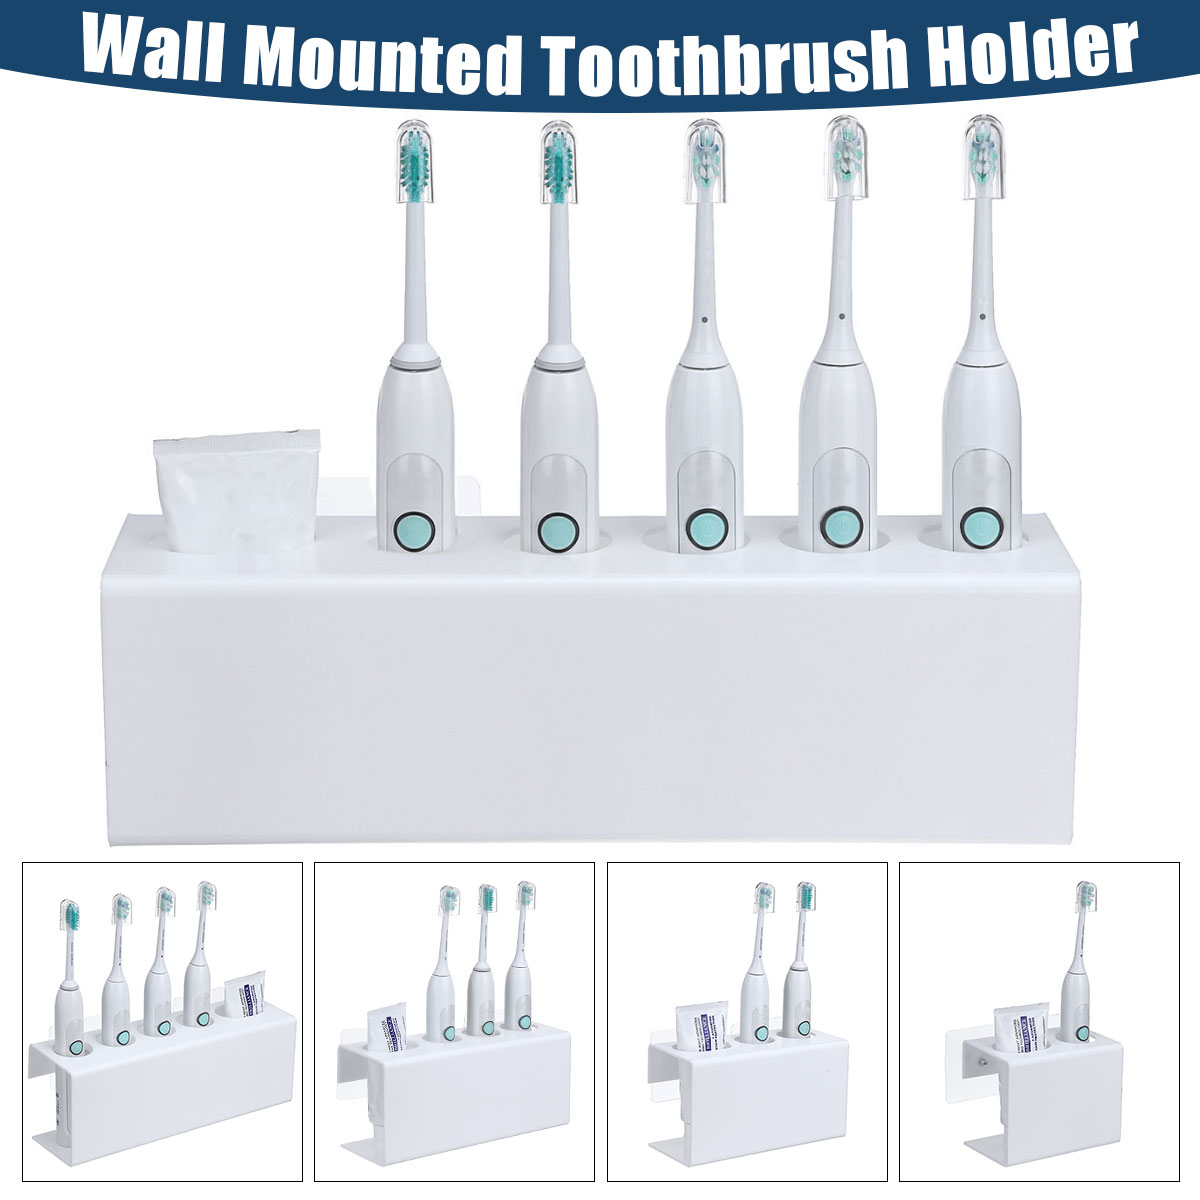 1PCS-Wall-Mounted-Electric-Toothbrush-Holder-Toothpaste-Holder-Bathroom-Organizer-Detachable-Bathroo-1738124-1